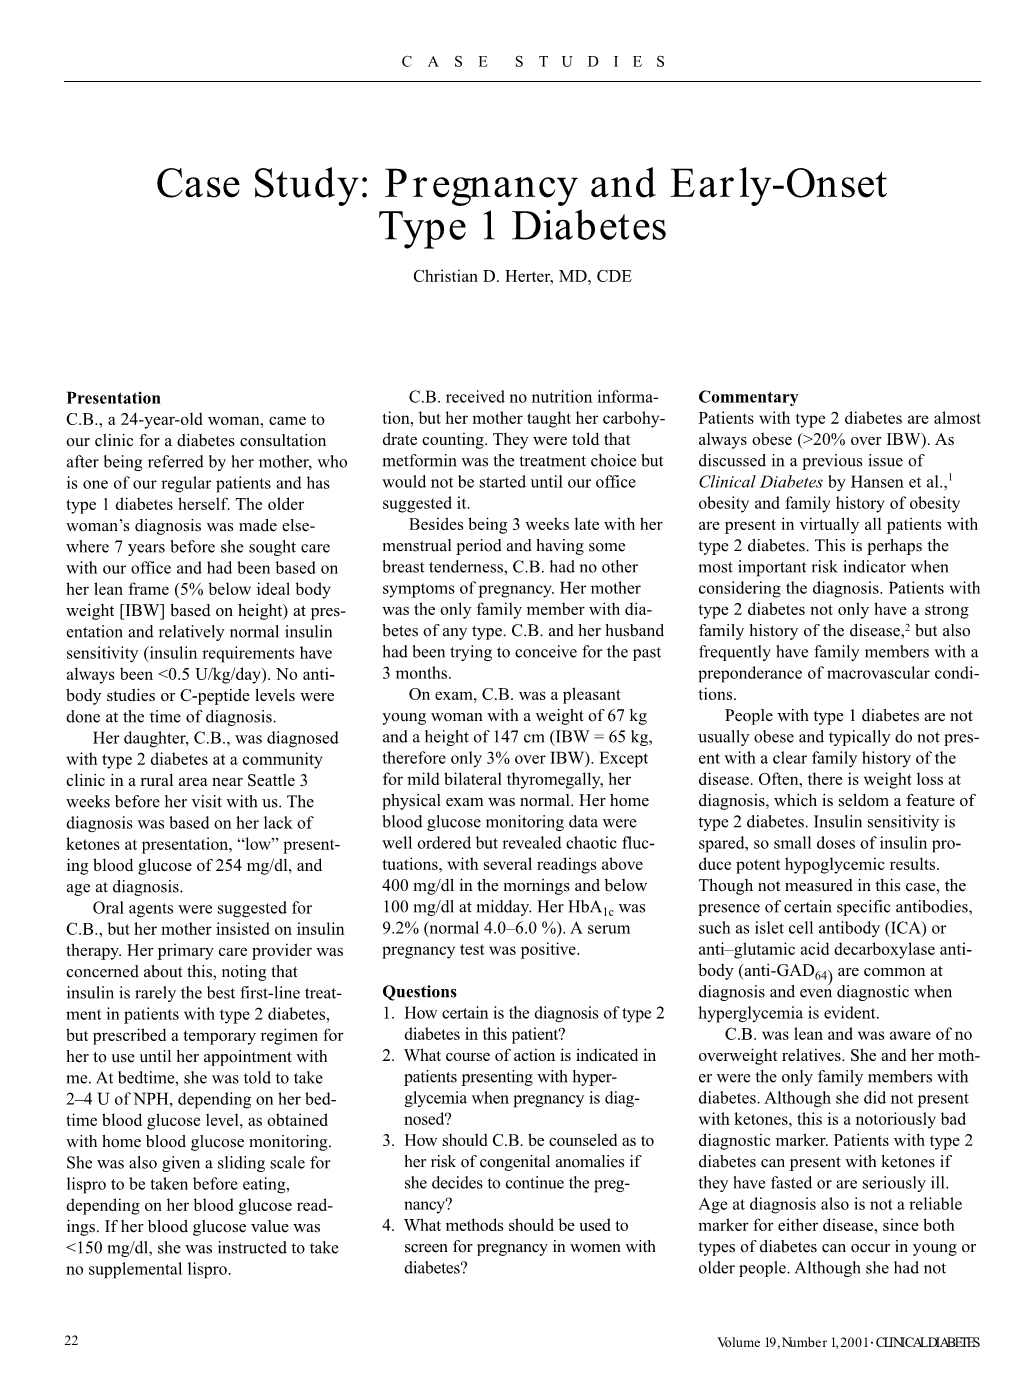 Case Study: Pregnancy and Early-Onset Type 1 Diabetes